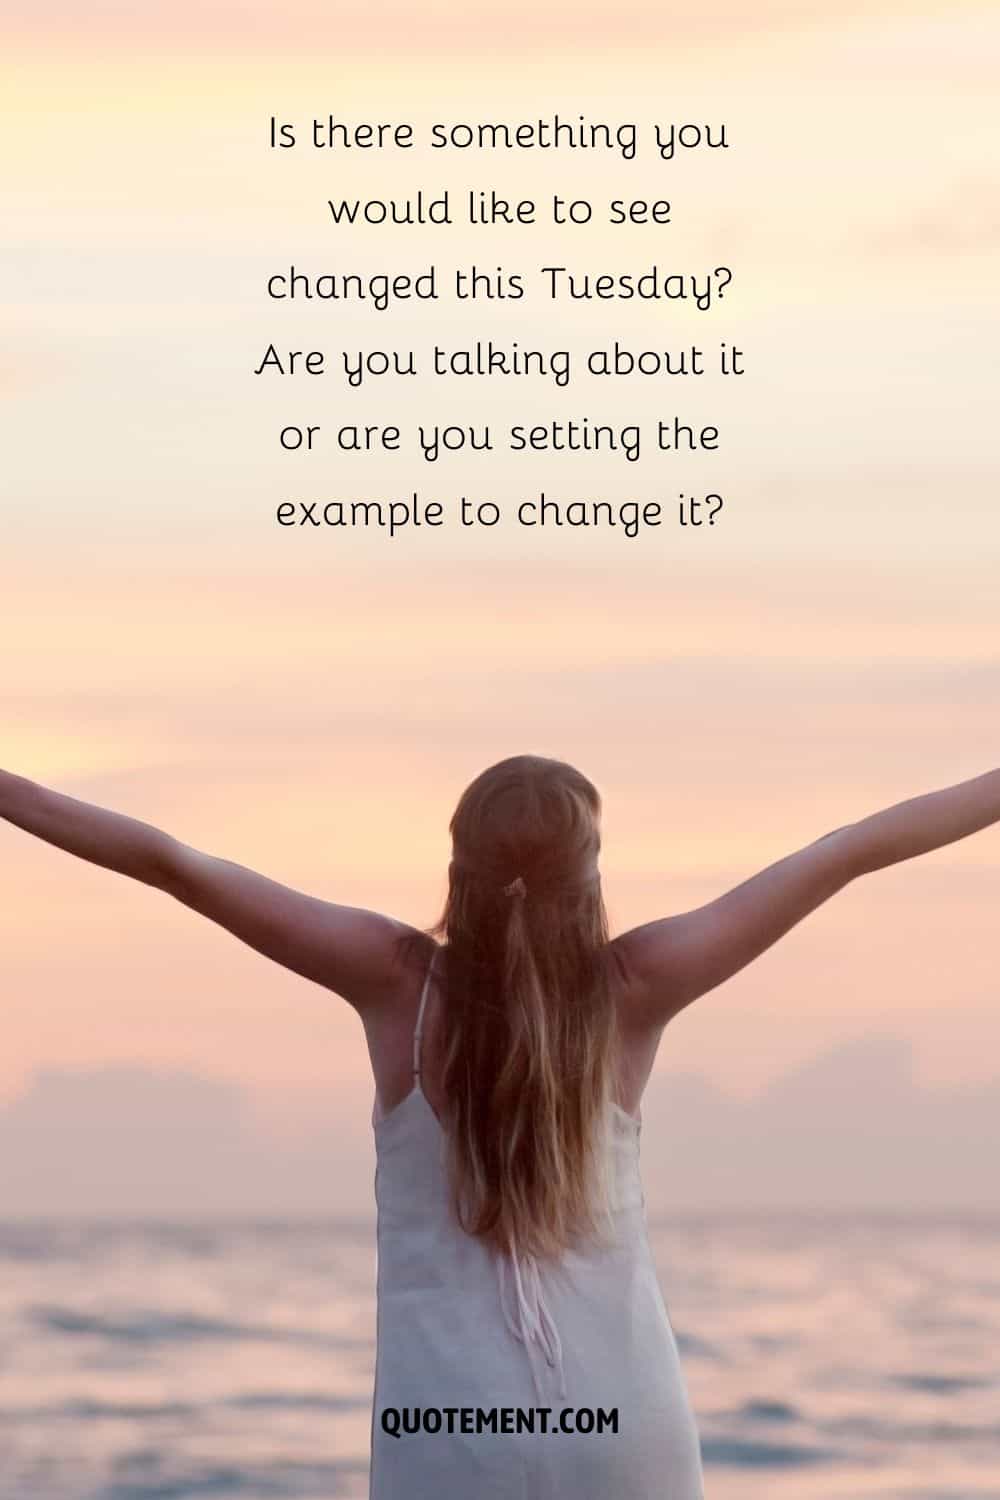 woman with raised hands image representing encouraging transformation Tuesday quote